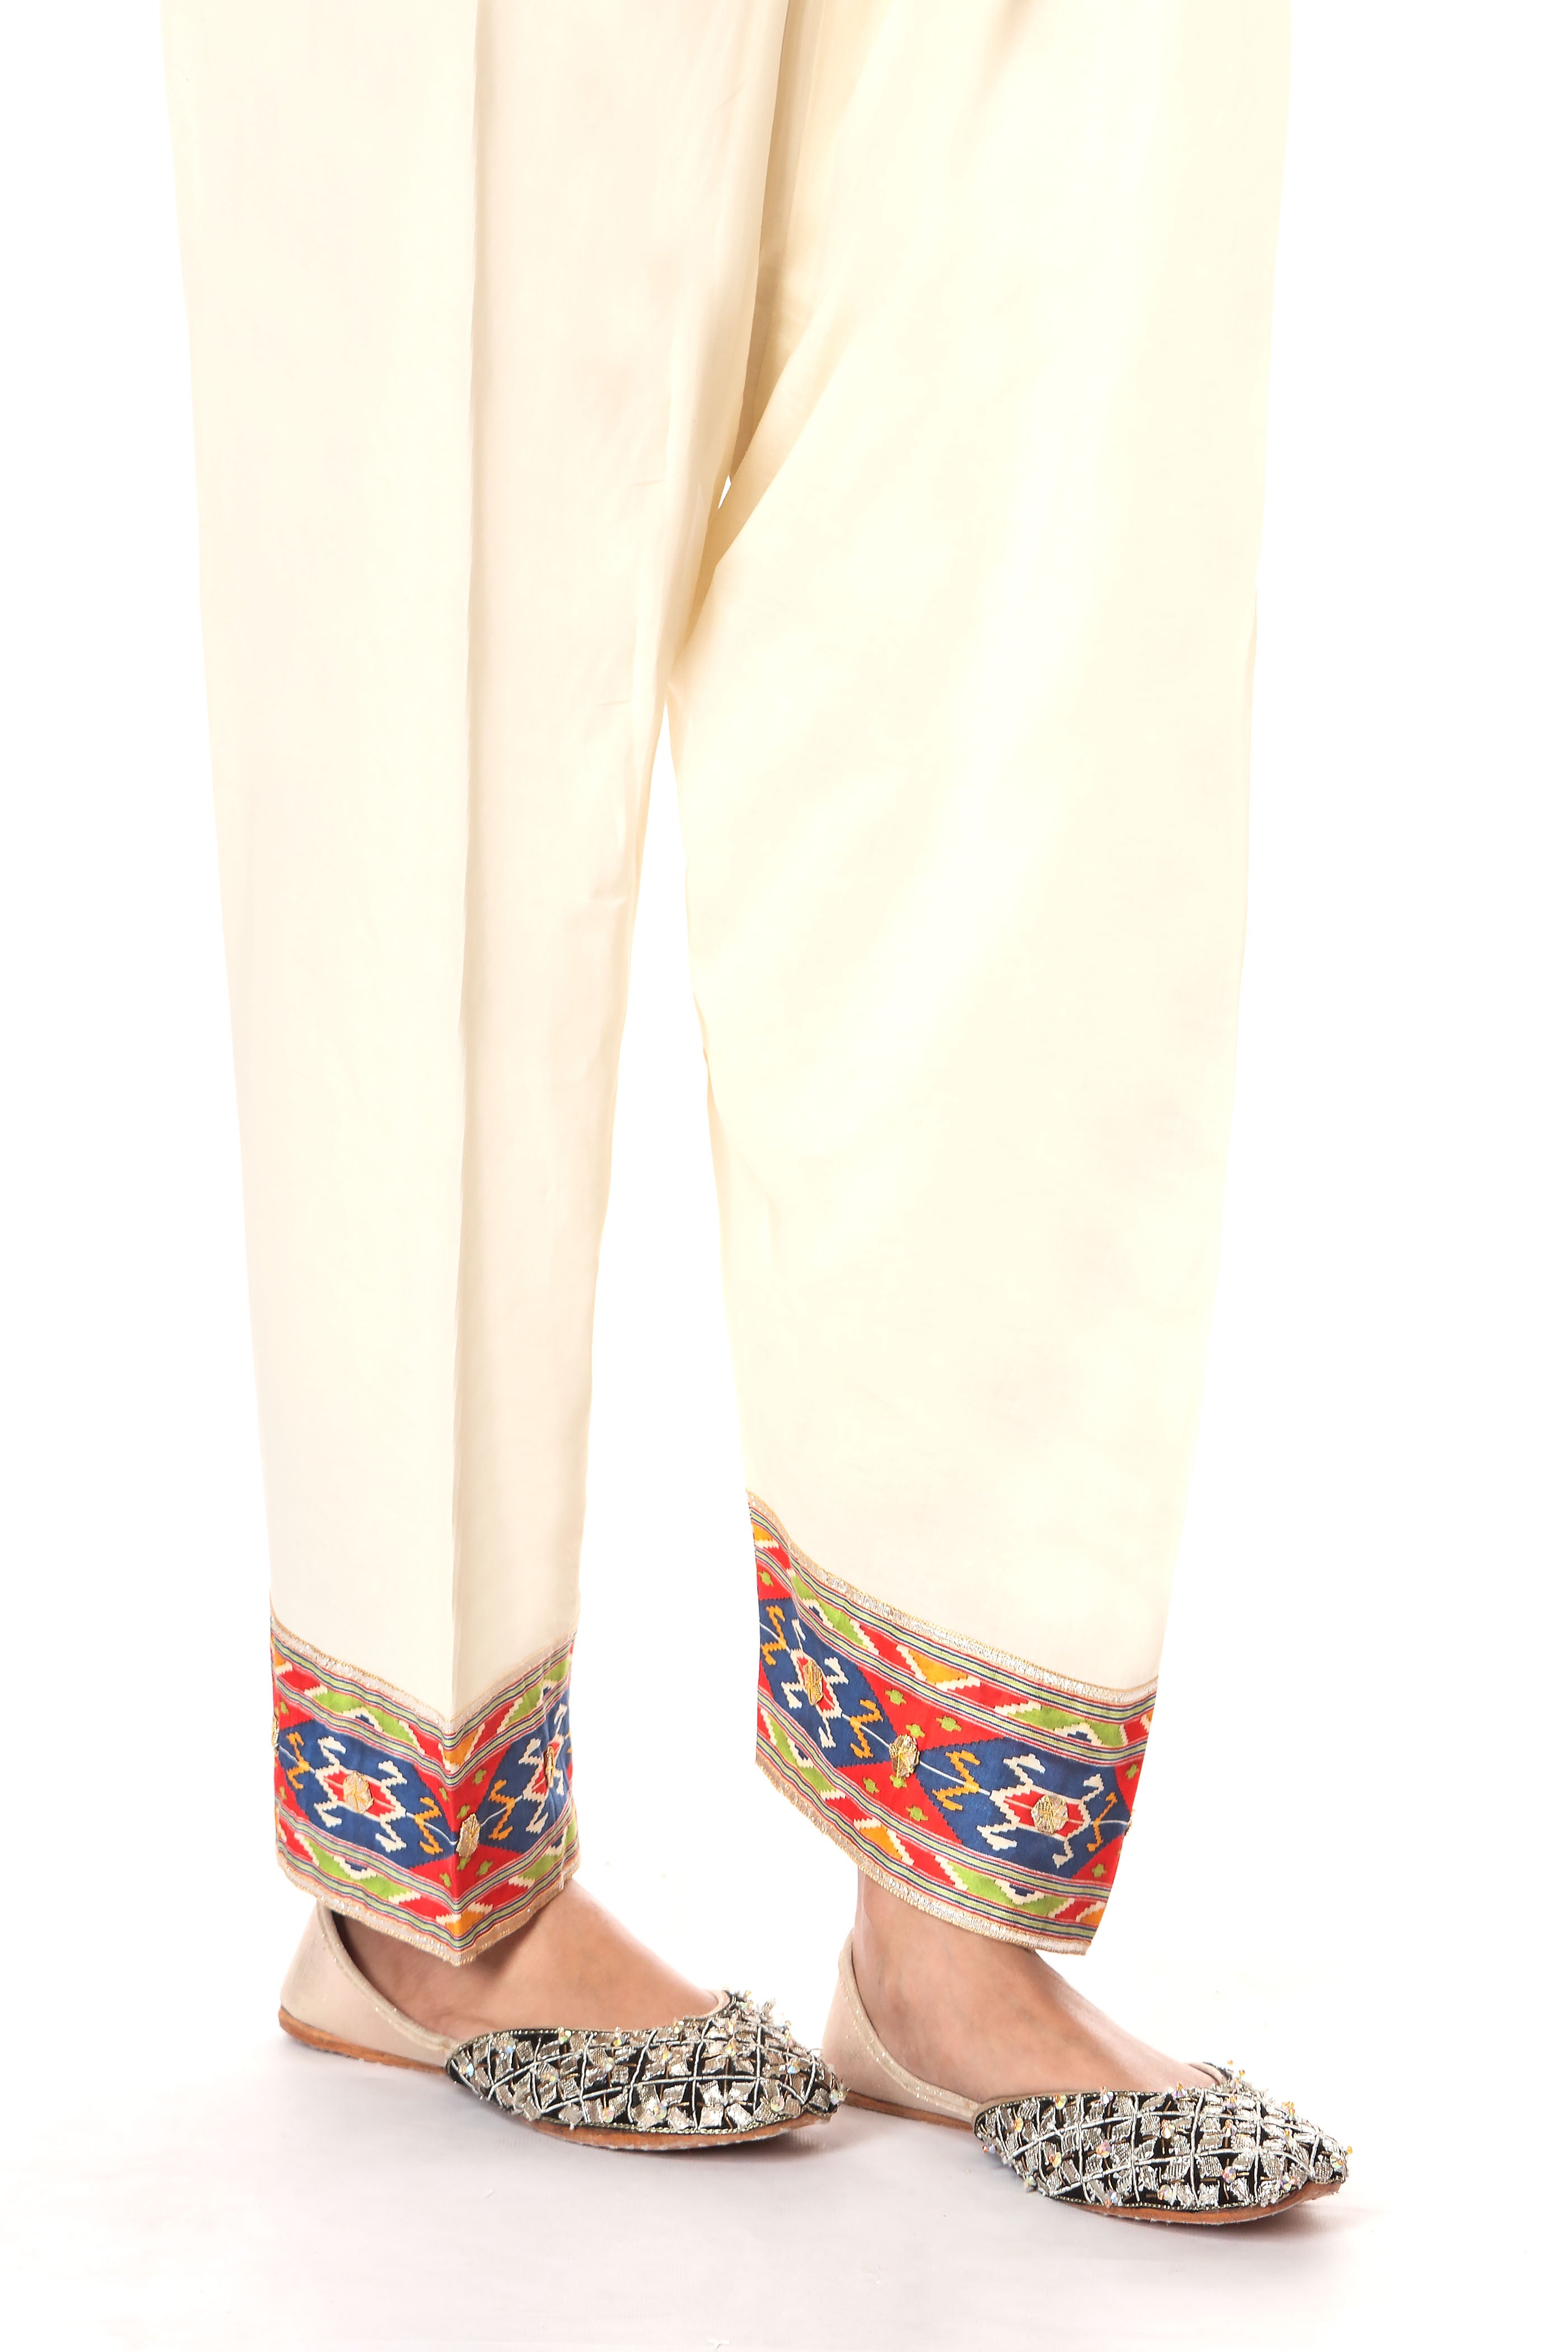 Ikkat Shalwar in Off White coloured Printed Lawn fabric 2